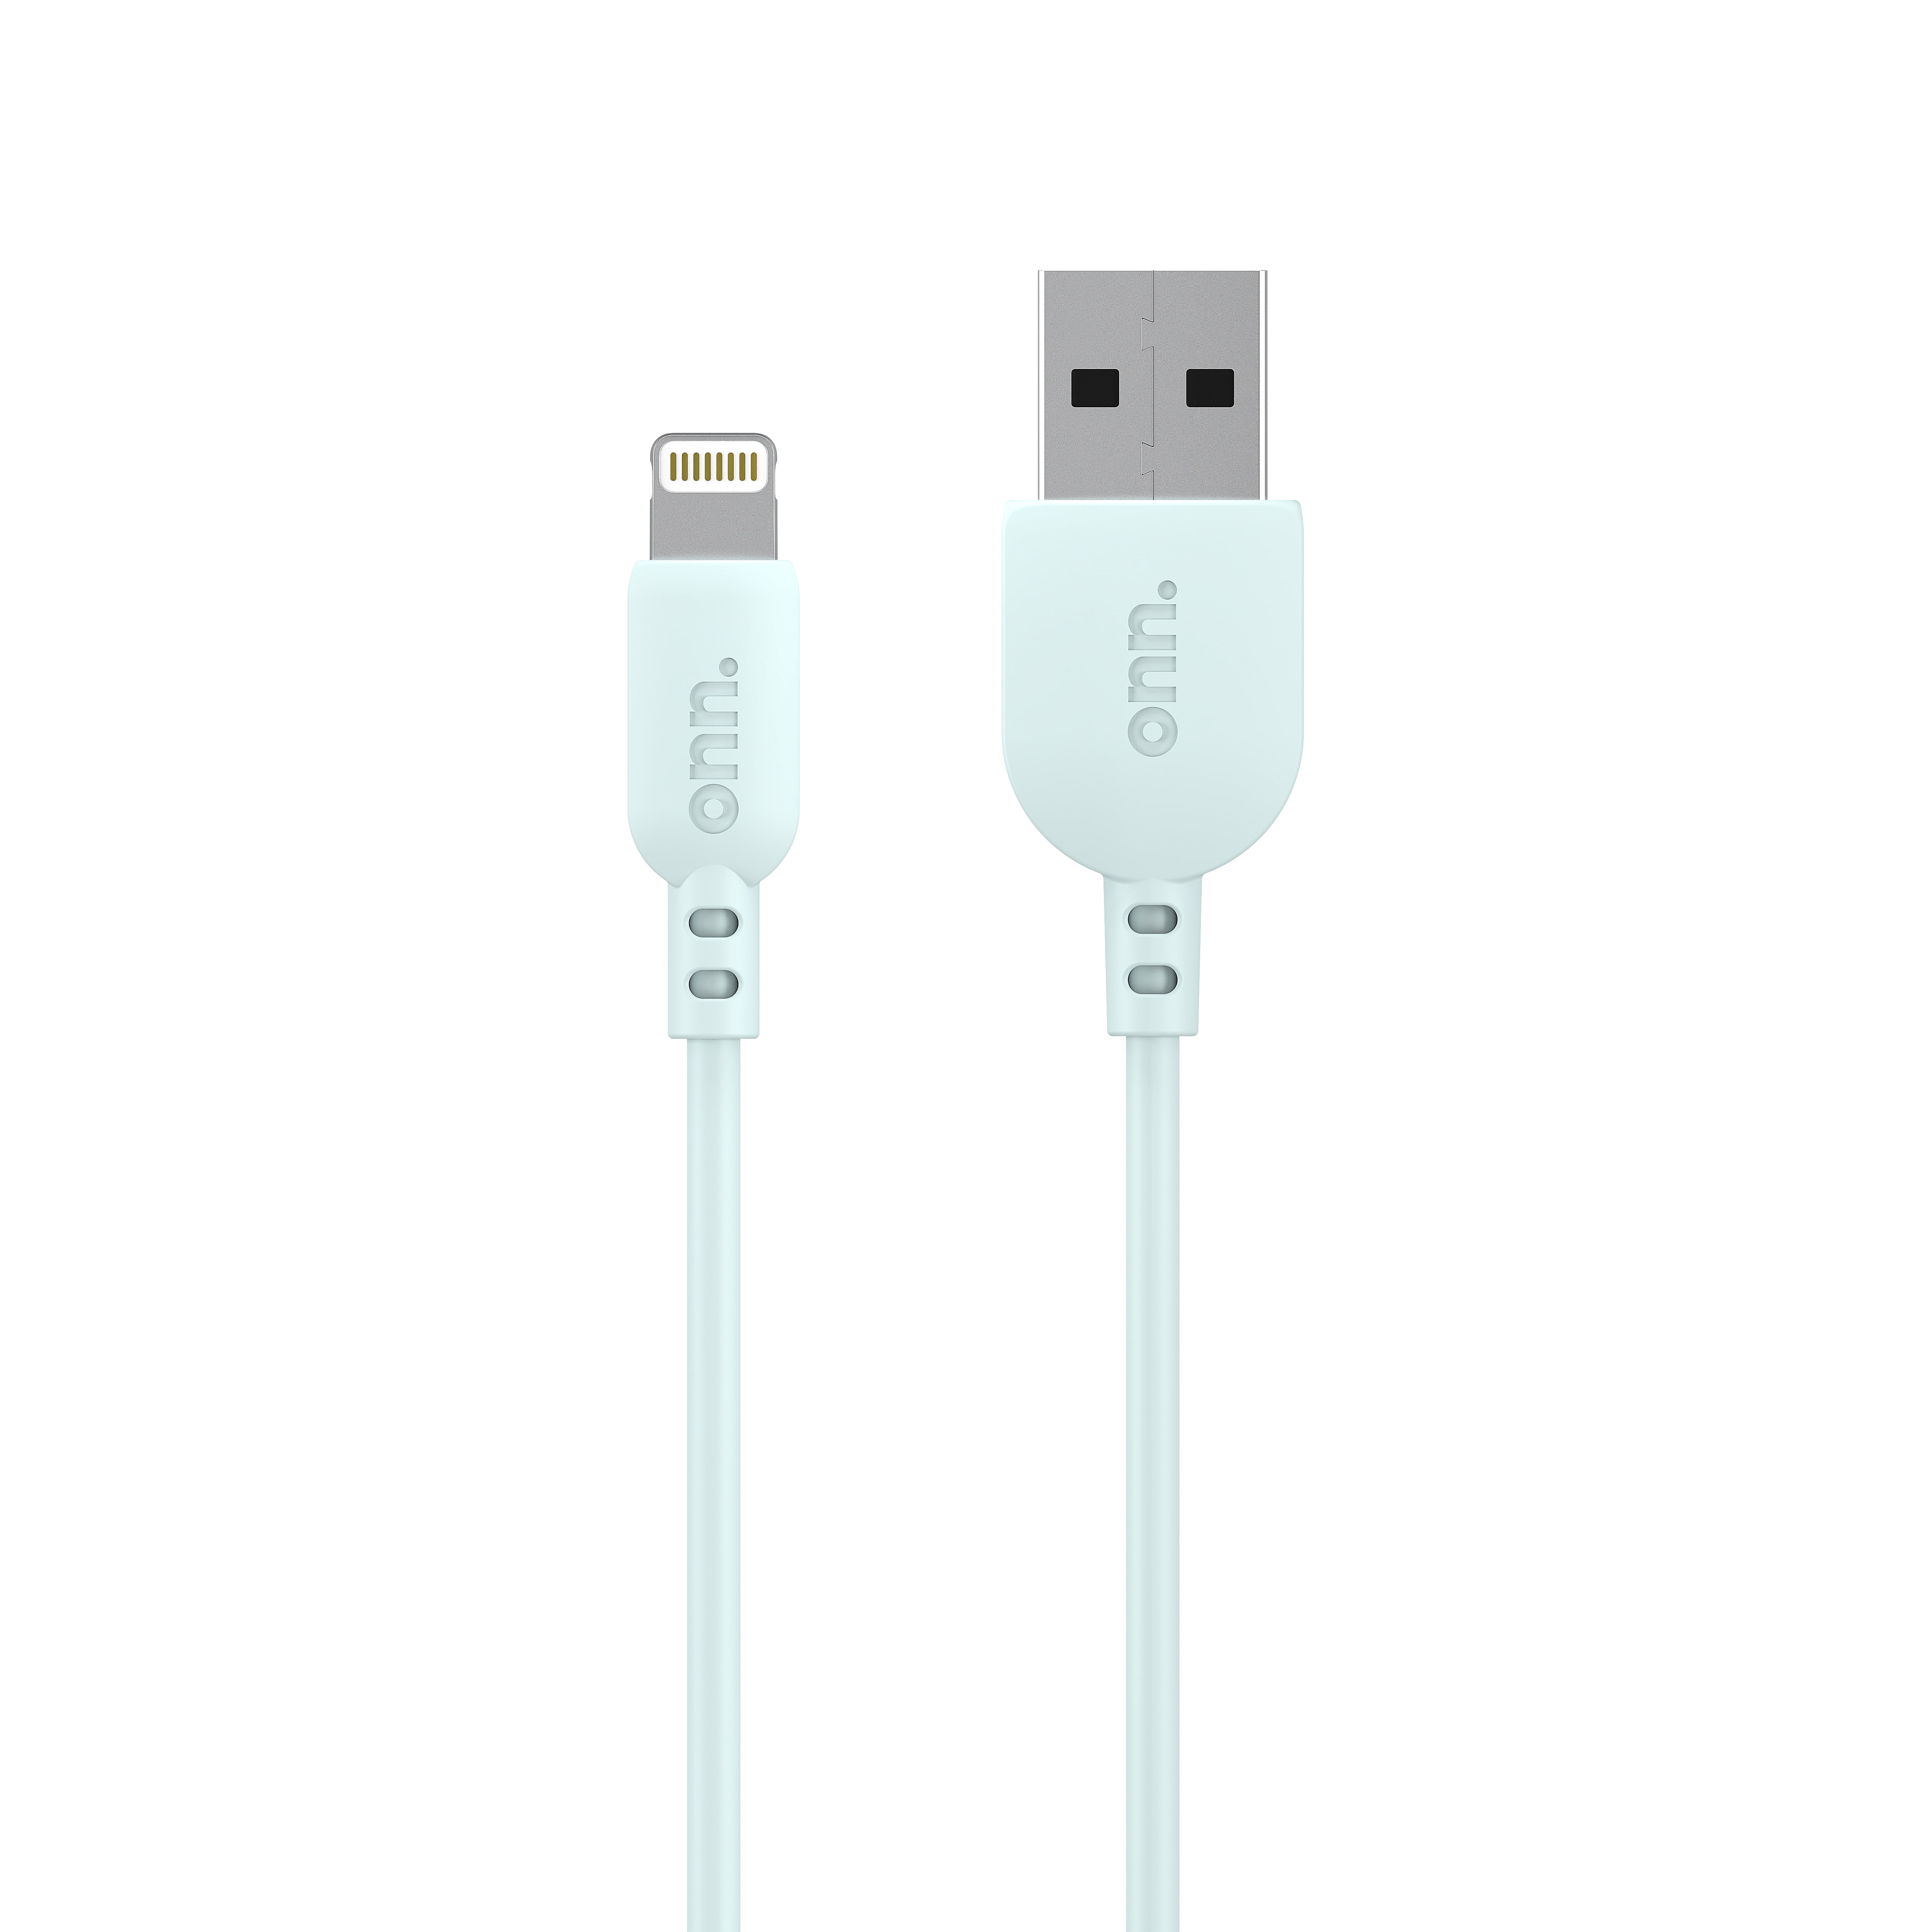 Charger Lightning to USB Cable Compatible iPhone 12/11 Pro/11/XS MAX/XR/8/7/6s/6/plus,iPad Pro/Air/Mini,iPod Touch Original Certified-White iPhone Charger,Original3 Pack 3 6 10FT Apple MFi Certified 